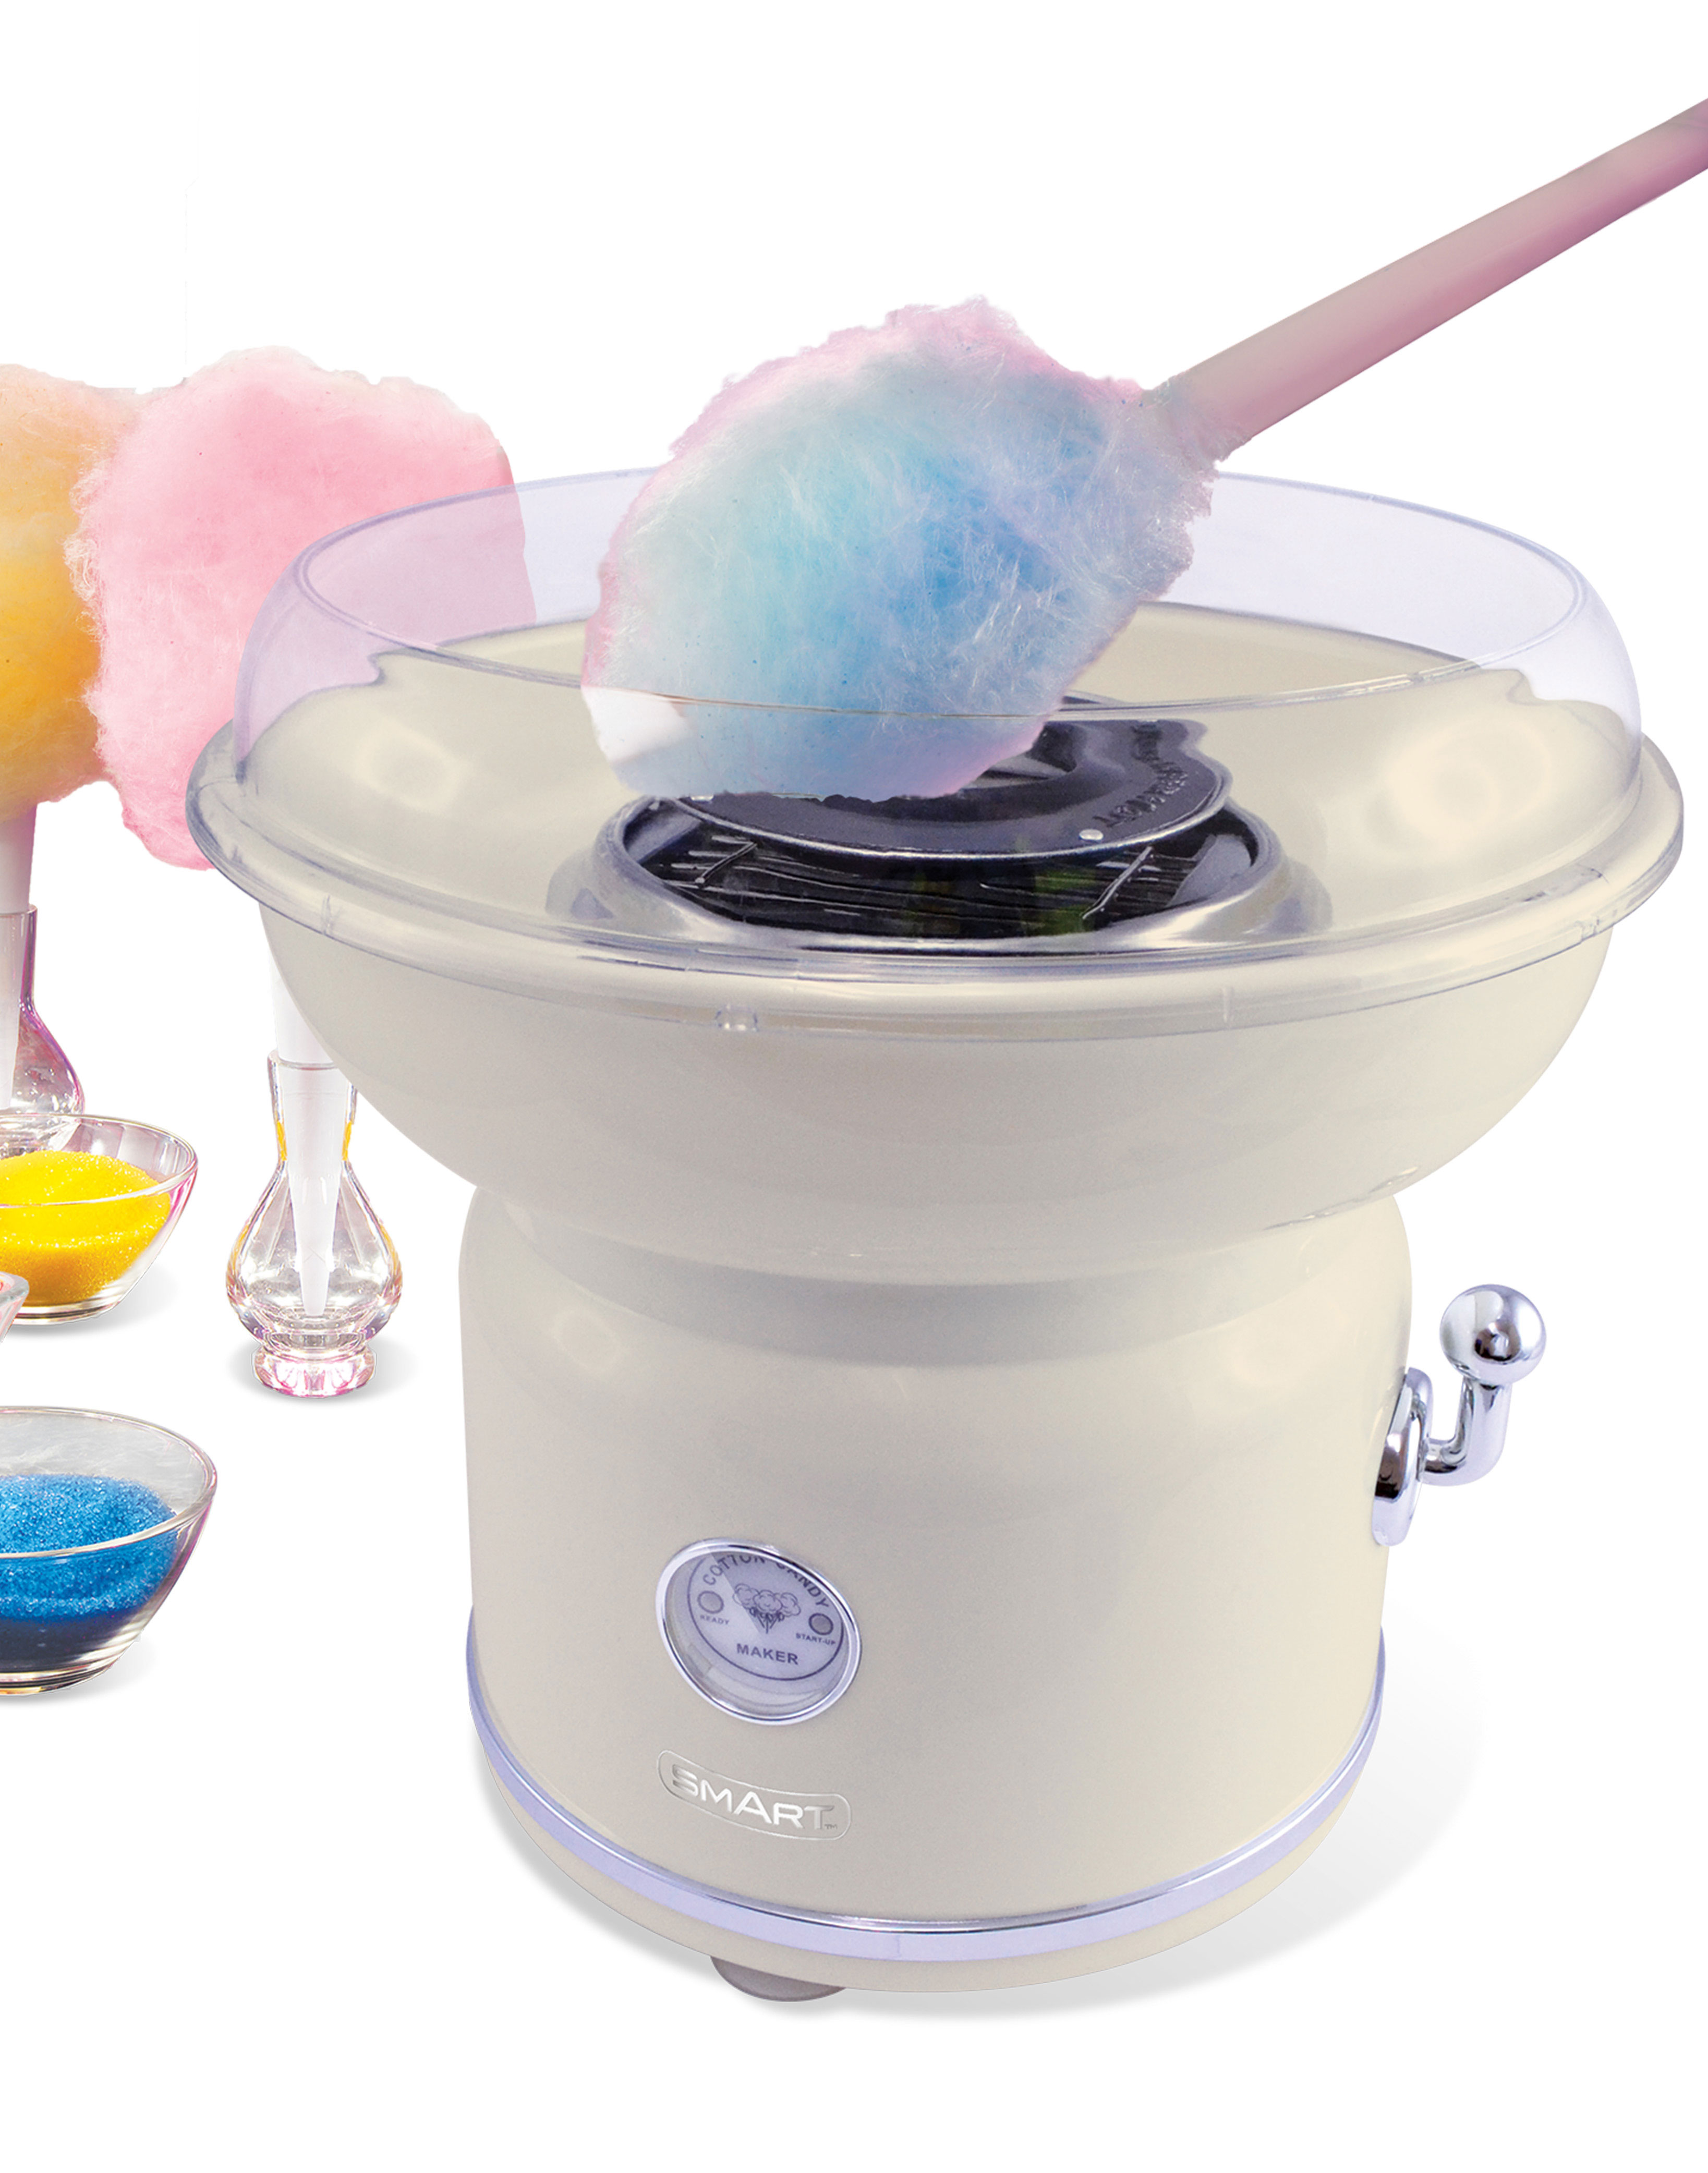 SMART Candy Floss Maker Bundle with Free Belgian Chocolate Sugar Free Retro 1950’s Cotton Candy Maker Machine for Kids Or Adults PCM805R 